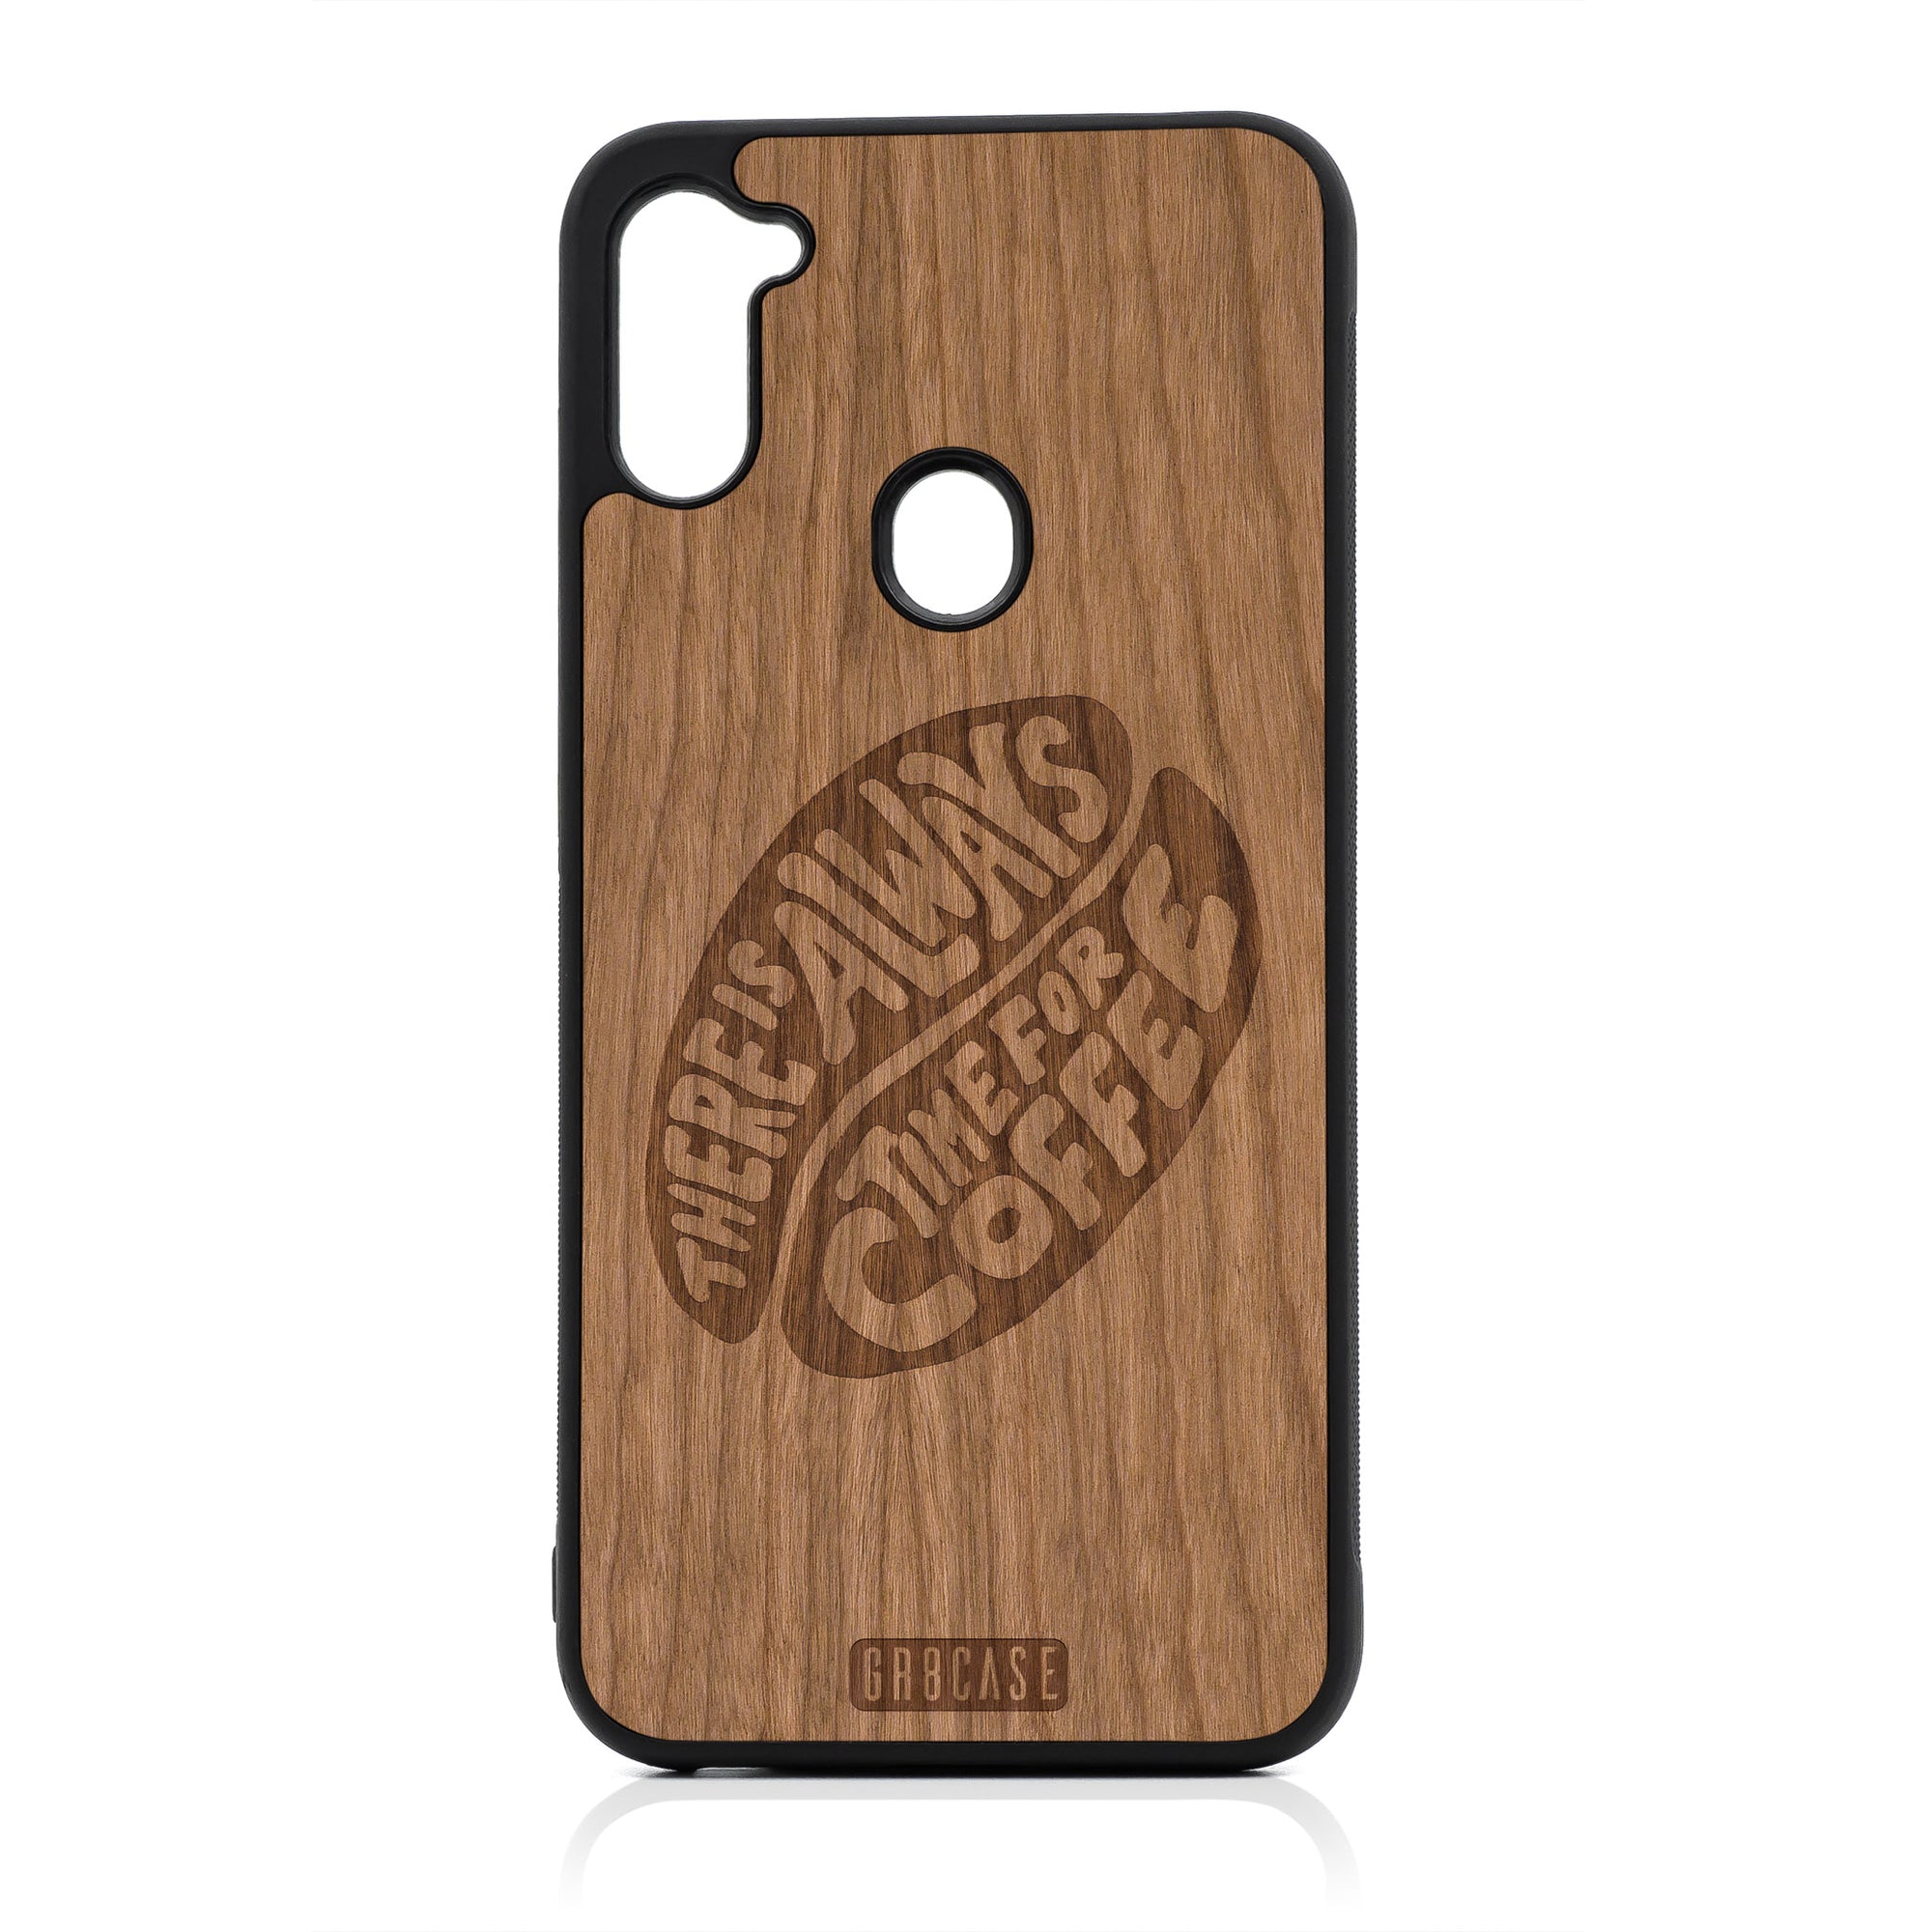 There Is Always Time For Coffee Design Wood Case For Samsung Galaxy A11